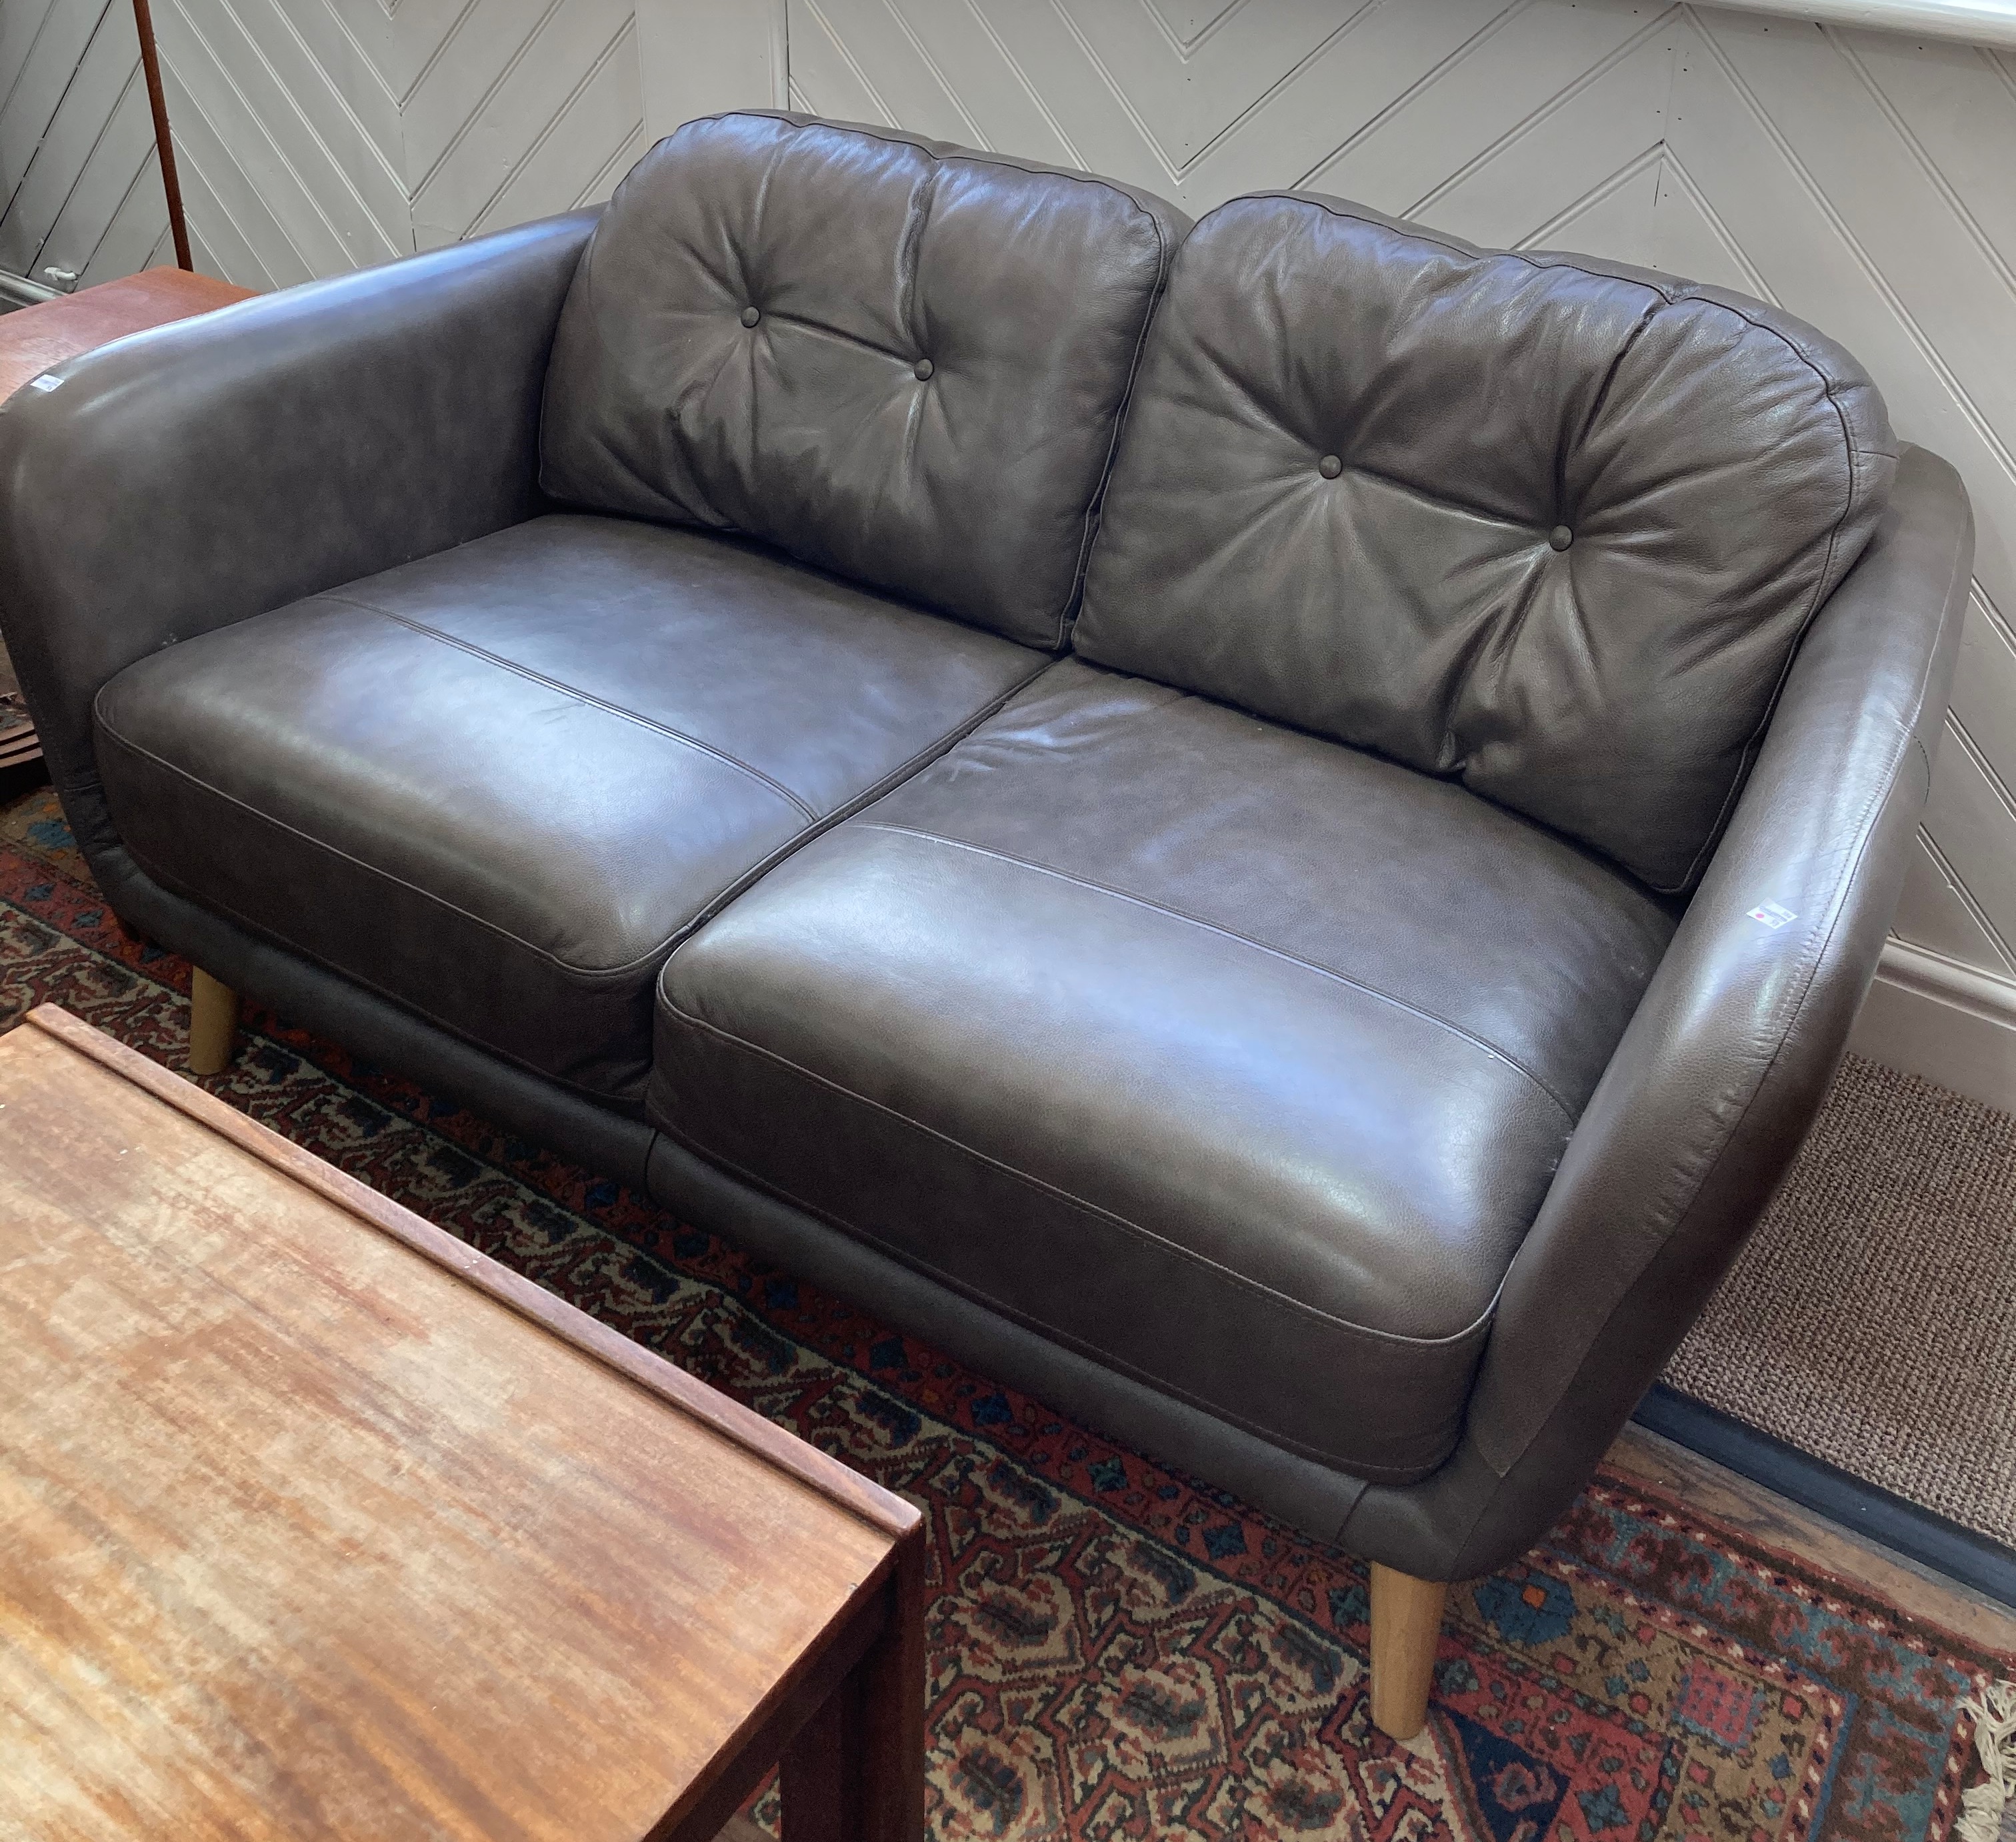 A modern leather retro style Two Seater Sofa, by John Lewis, the button-back in grey leather uphols - Image 2 of 2